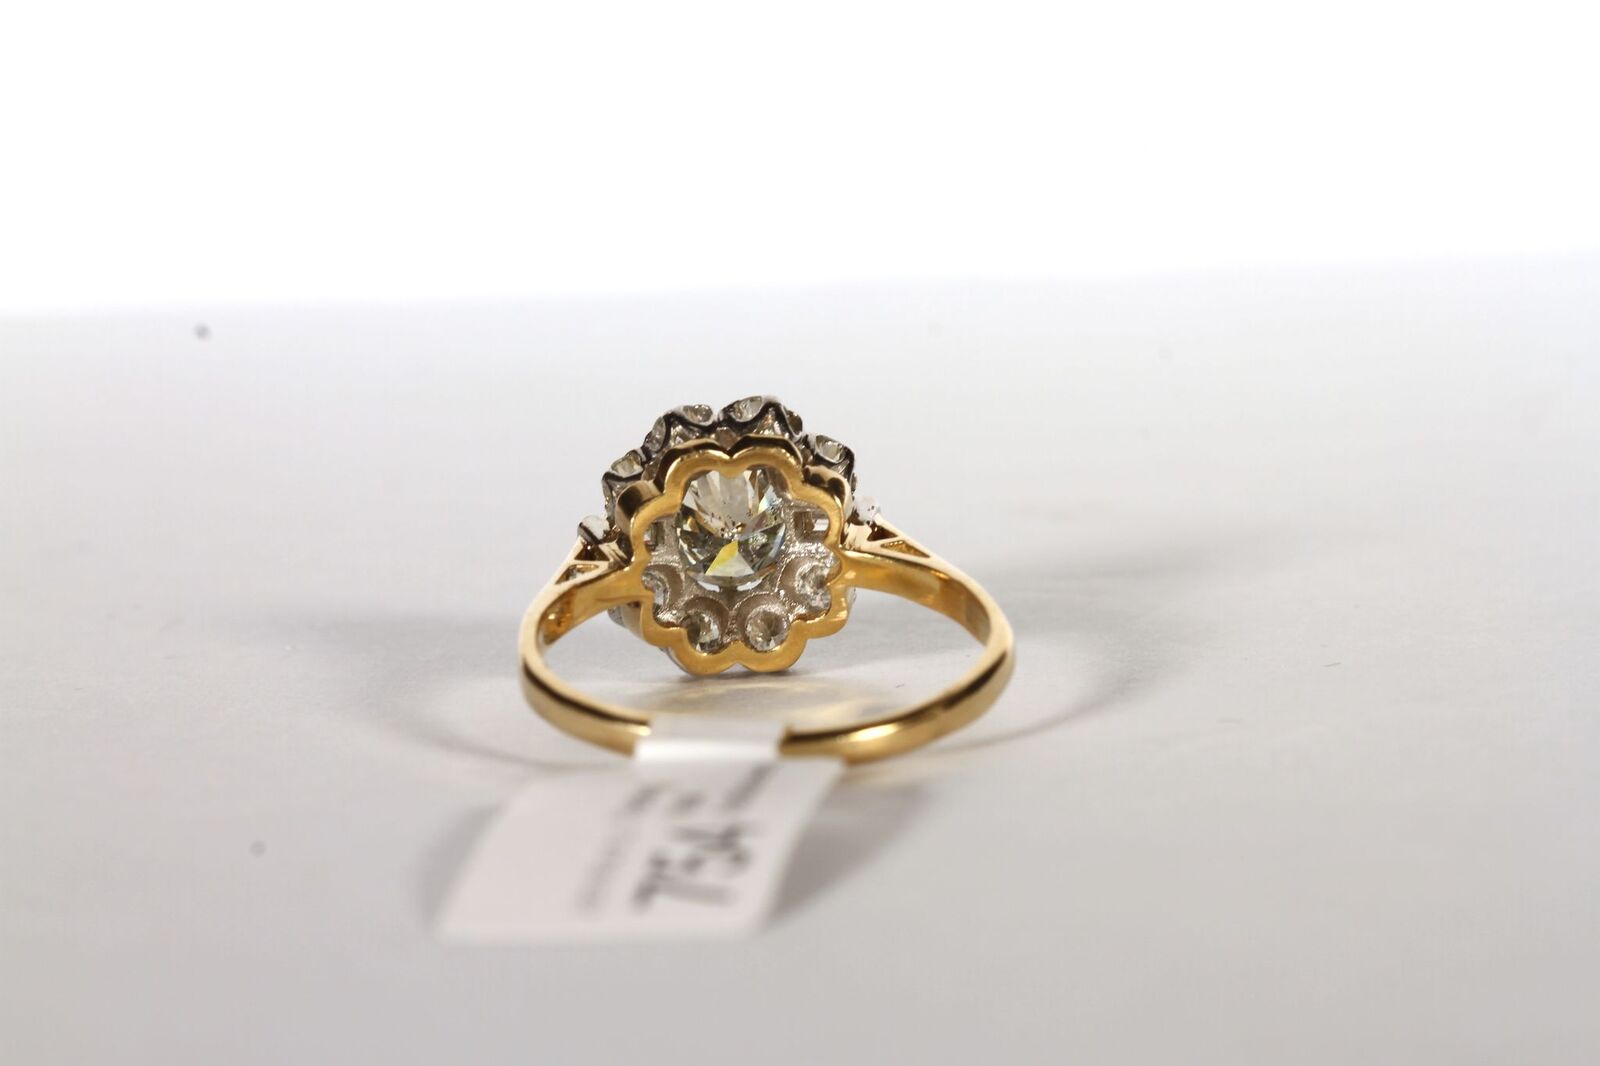 Diamond Cluster Ring, set with a central diamond approximately 0.73ct, surrounded by 2 baguette - Image 3 of 3